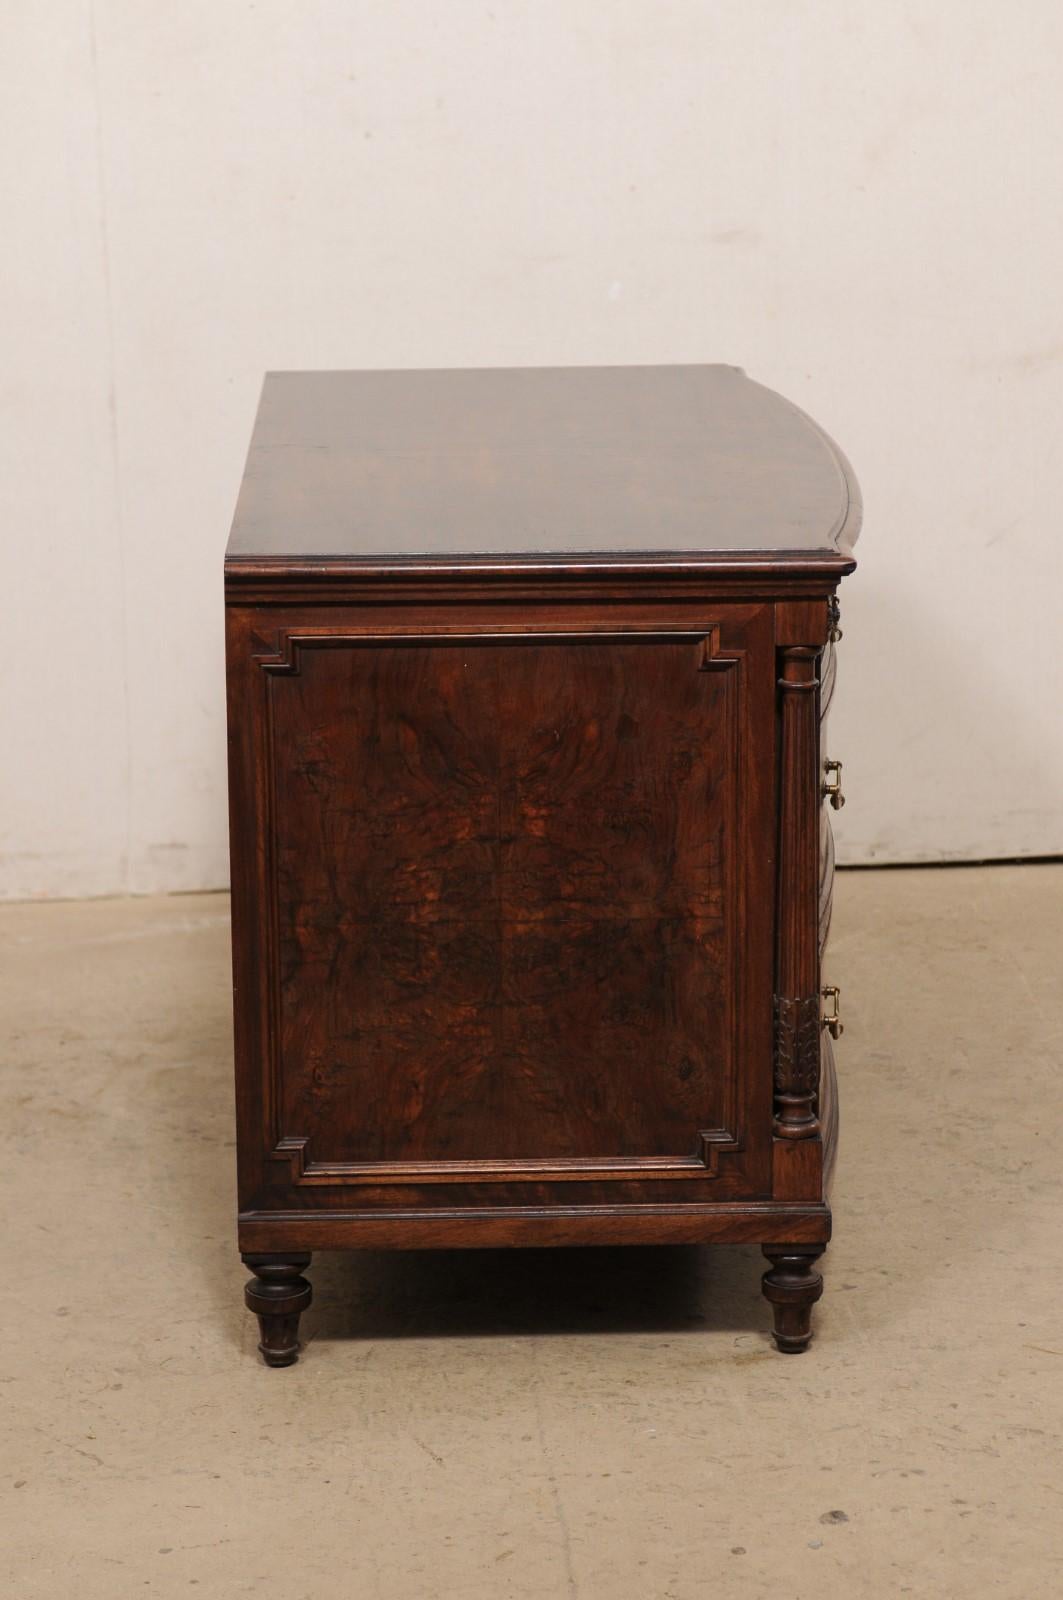 20th Century Antique Bow-Front 5-Drawer Crotch-Mahogany Wood Chest w/Carved Column Sideposts